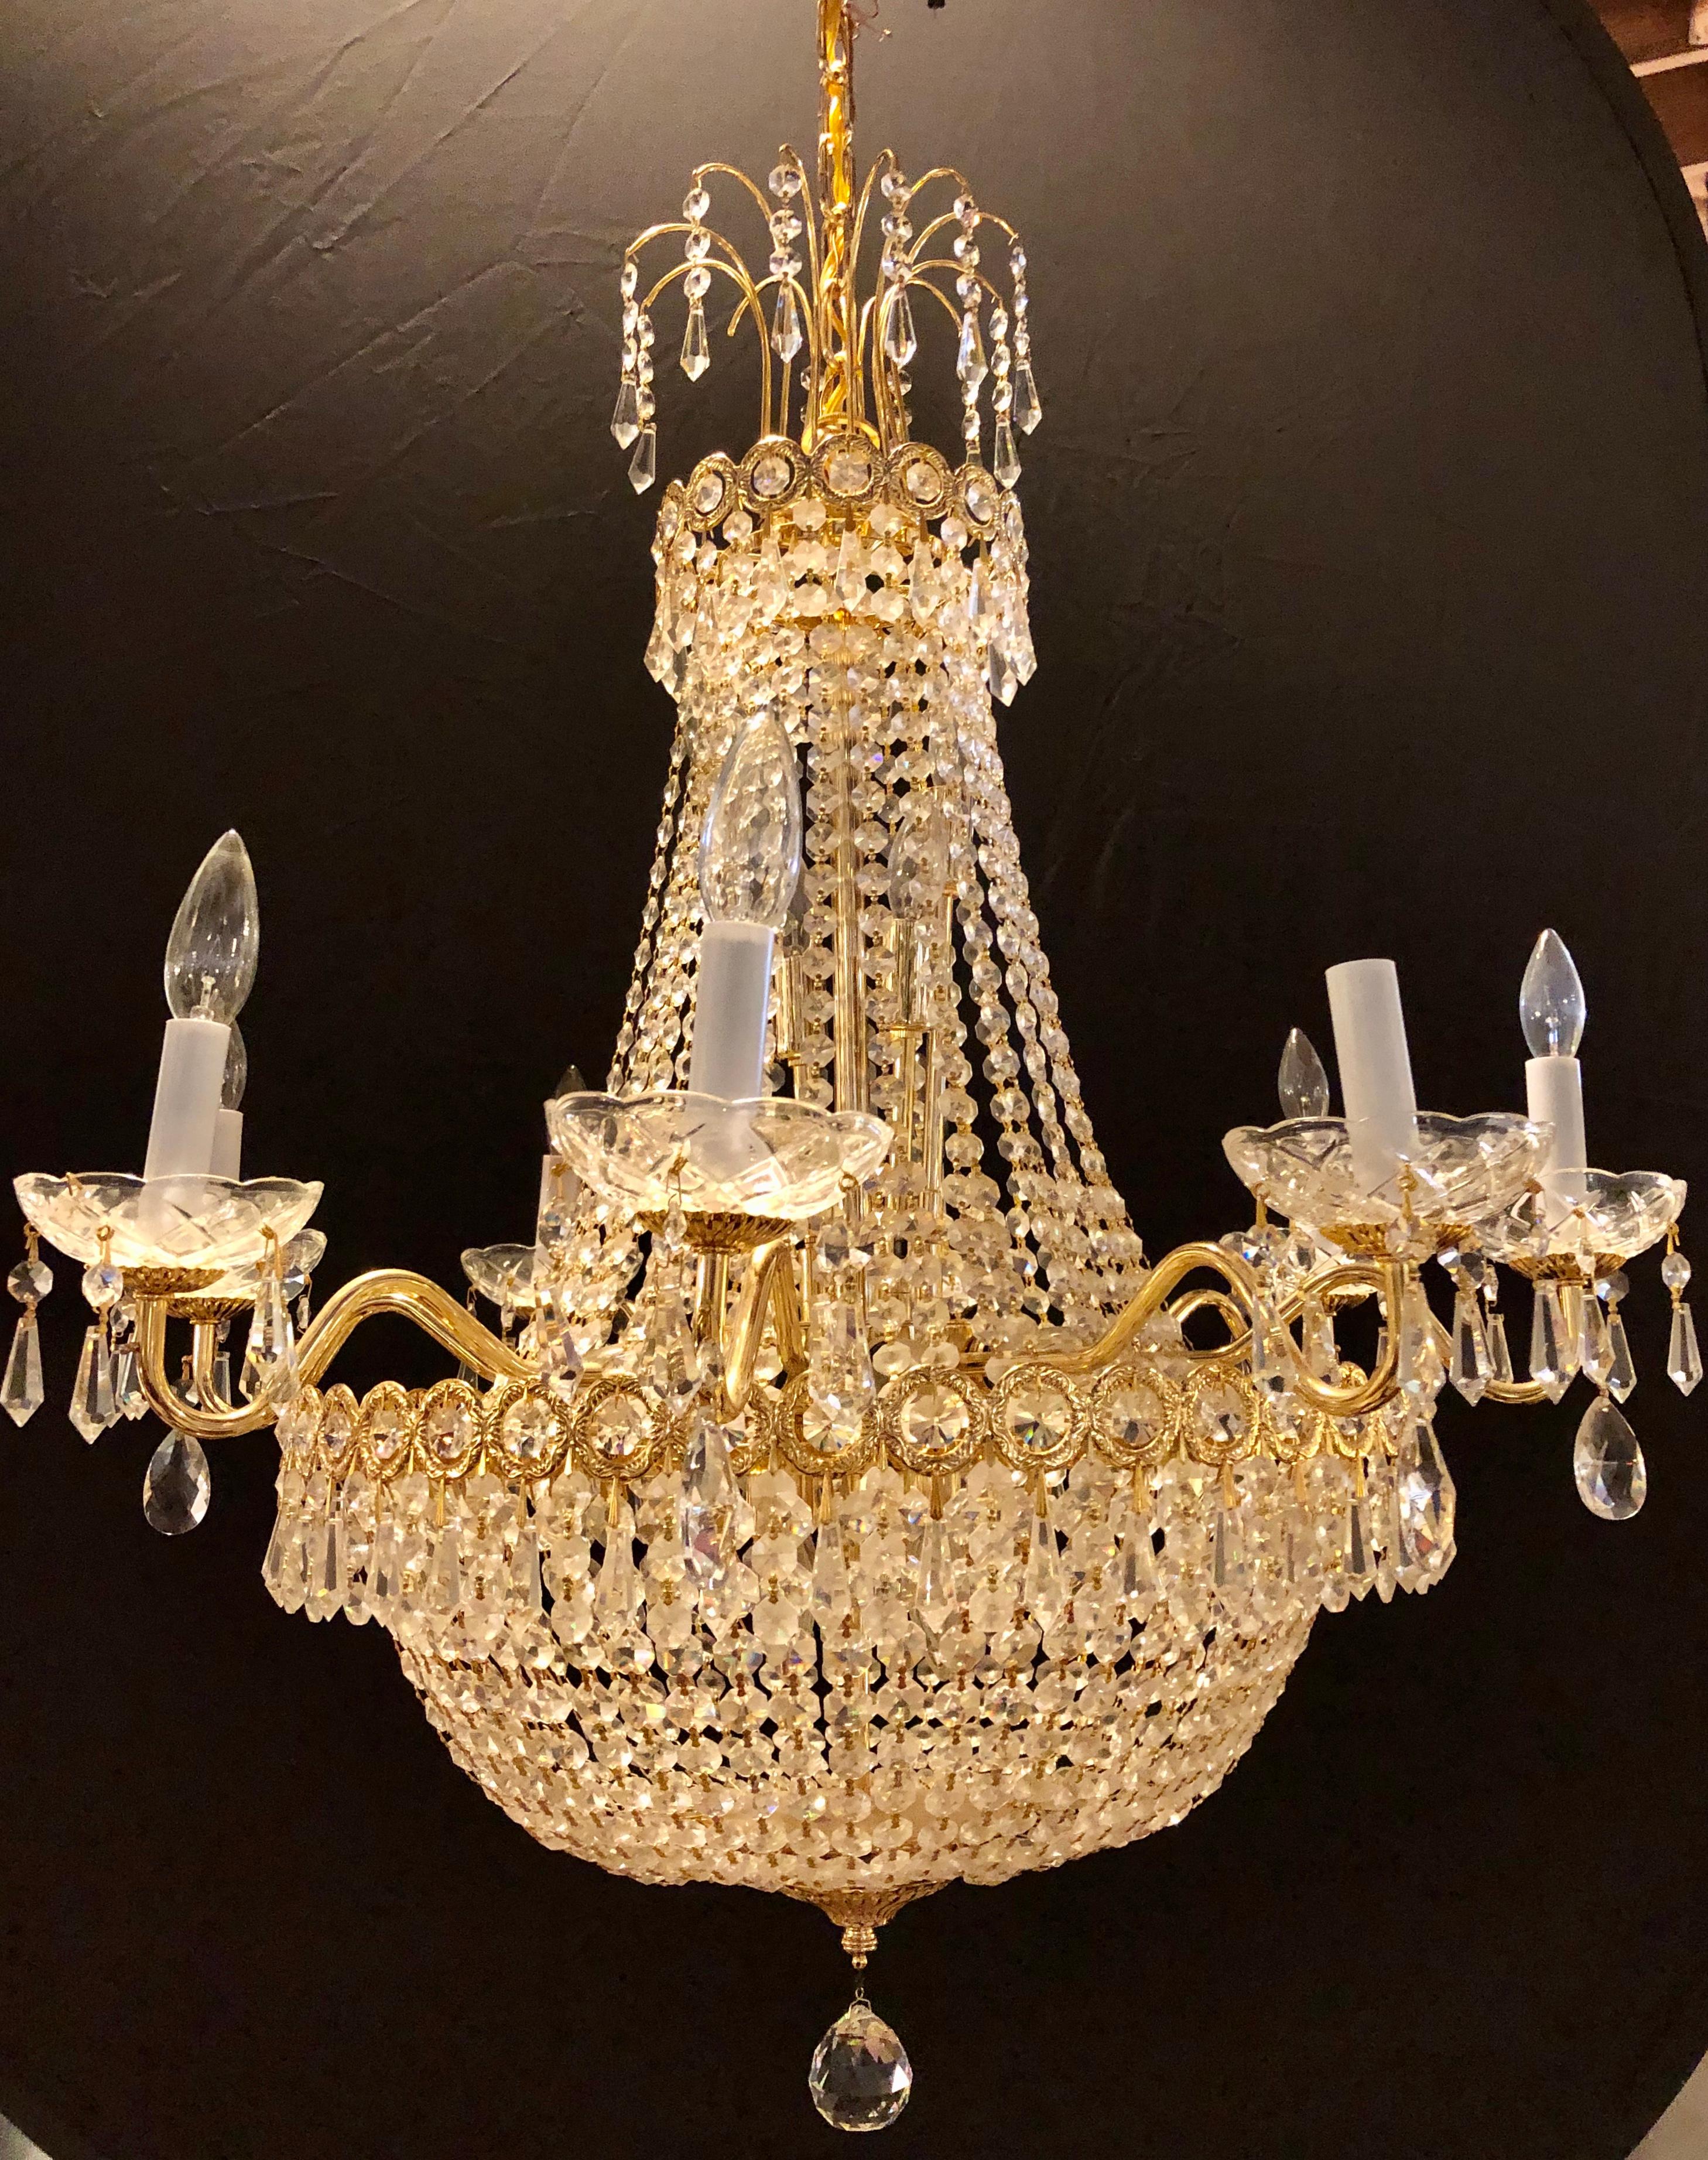 Hollywood Regency style chandelier in the form of Niermann Weeks. Bronze and crystal draping basket form crystal. 
Here you can celebrate the beauty of 18th century northern European lighting design with this lovely weeks style Belvedere looking